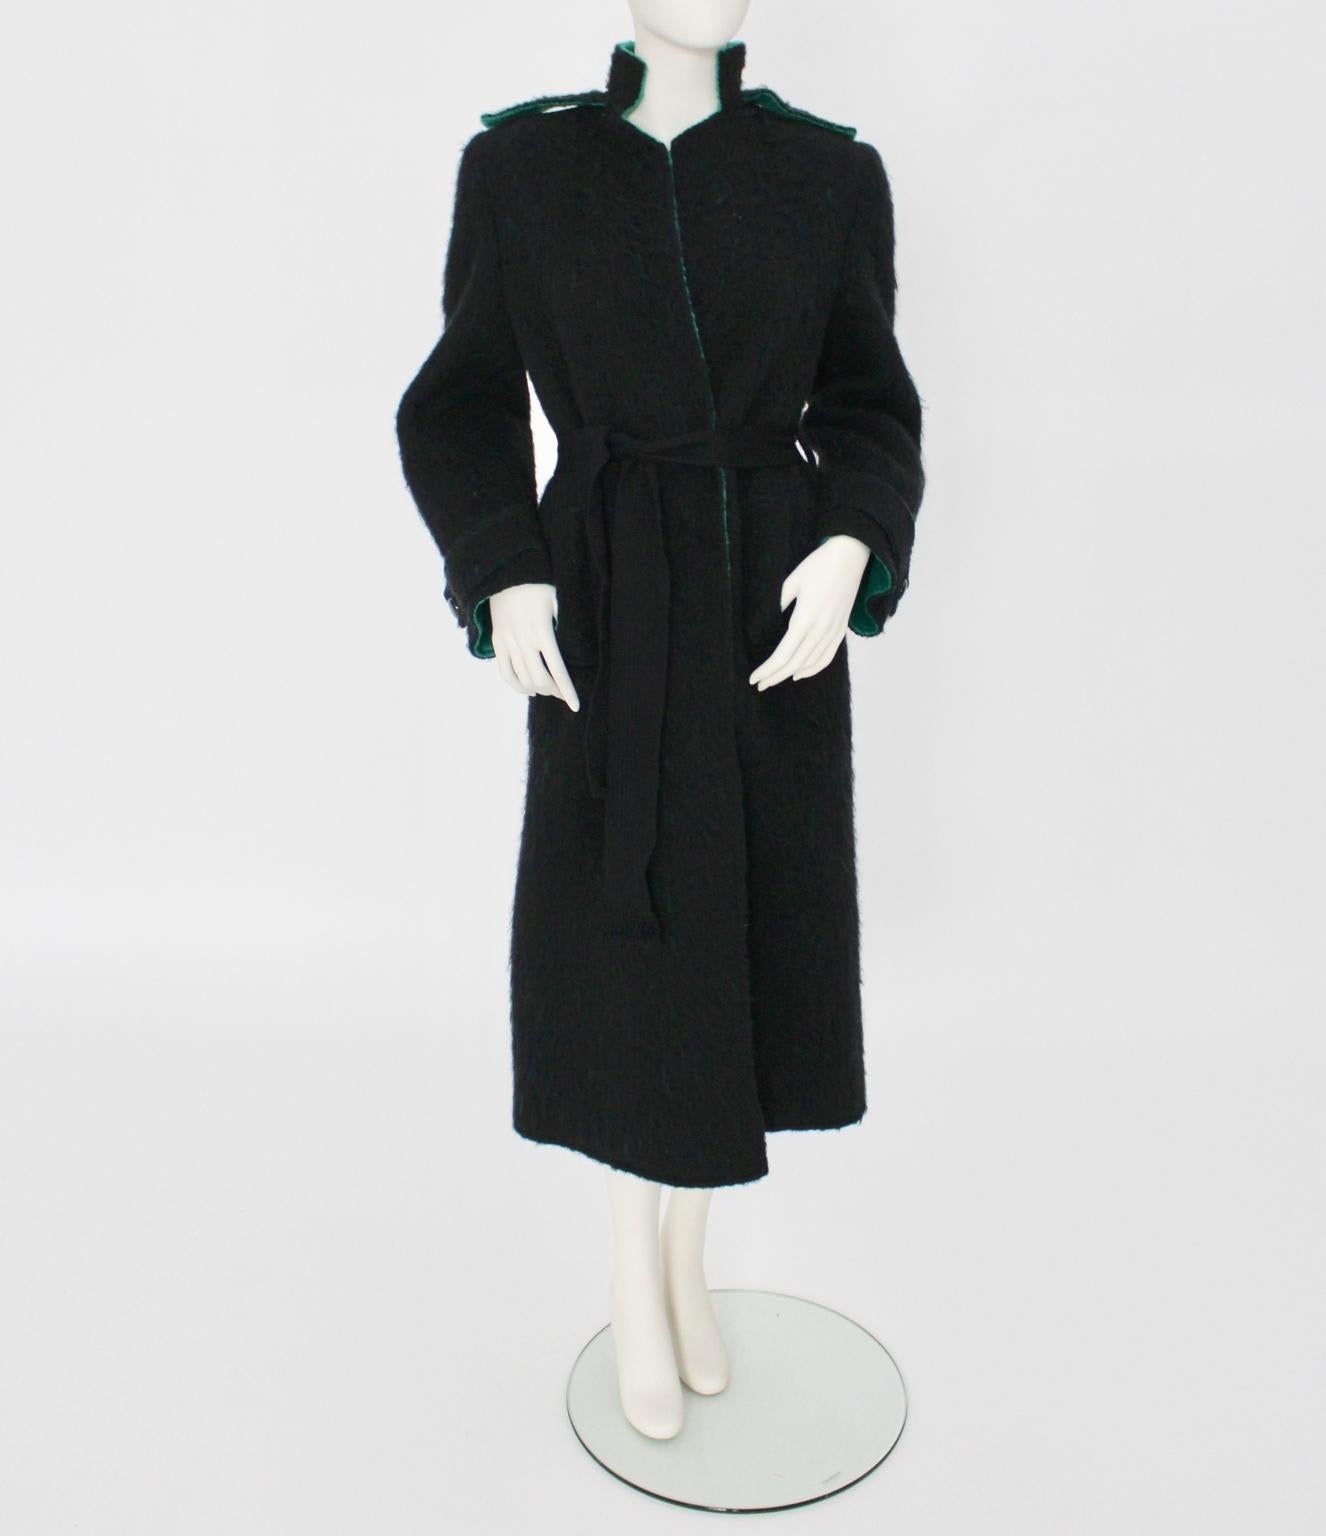 Women's Lancetti Roma Vintage Black and Green Wool Coat 1970s For Sale